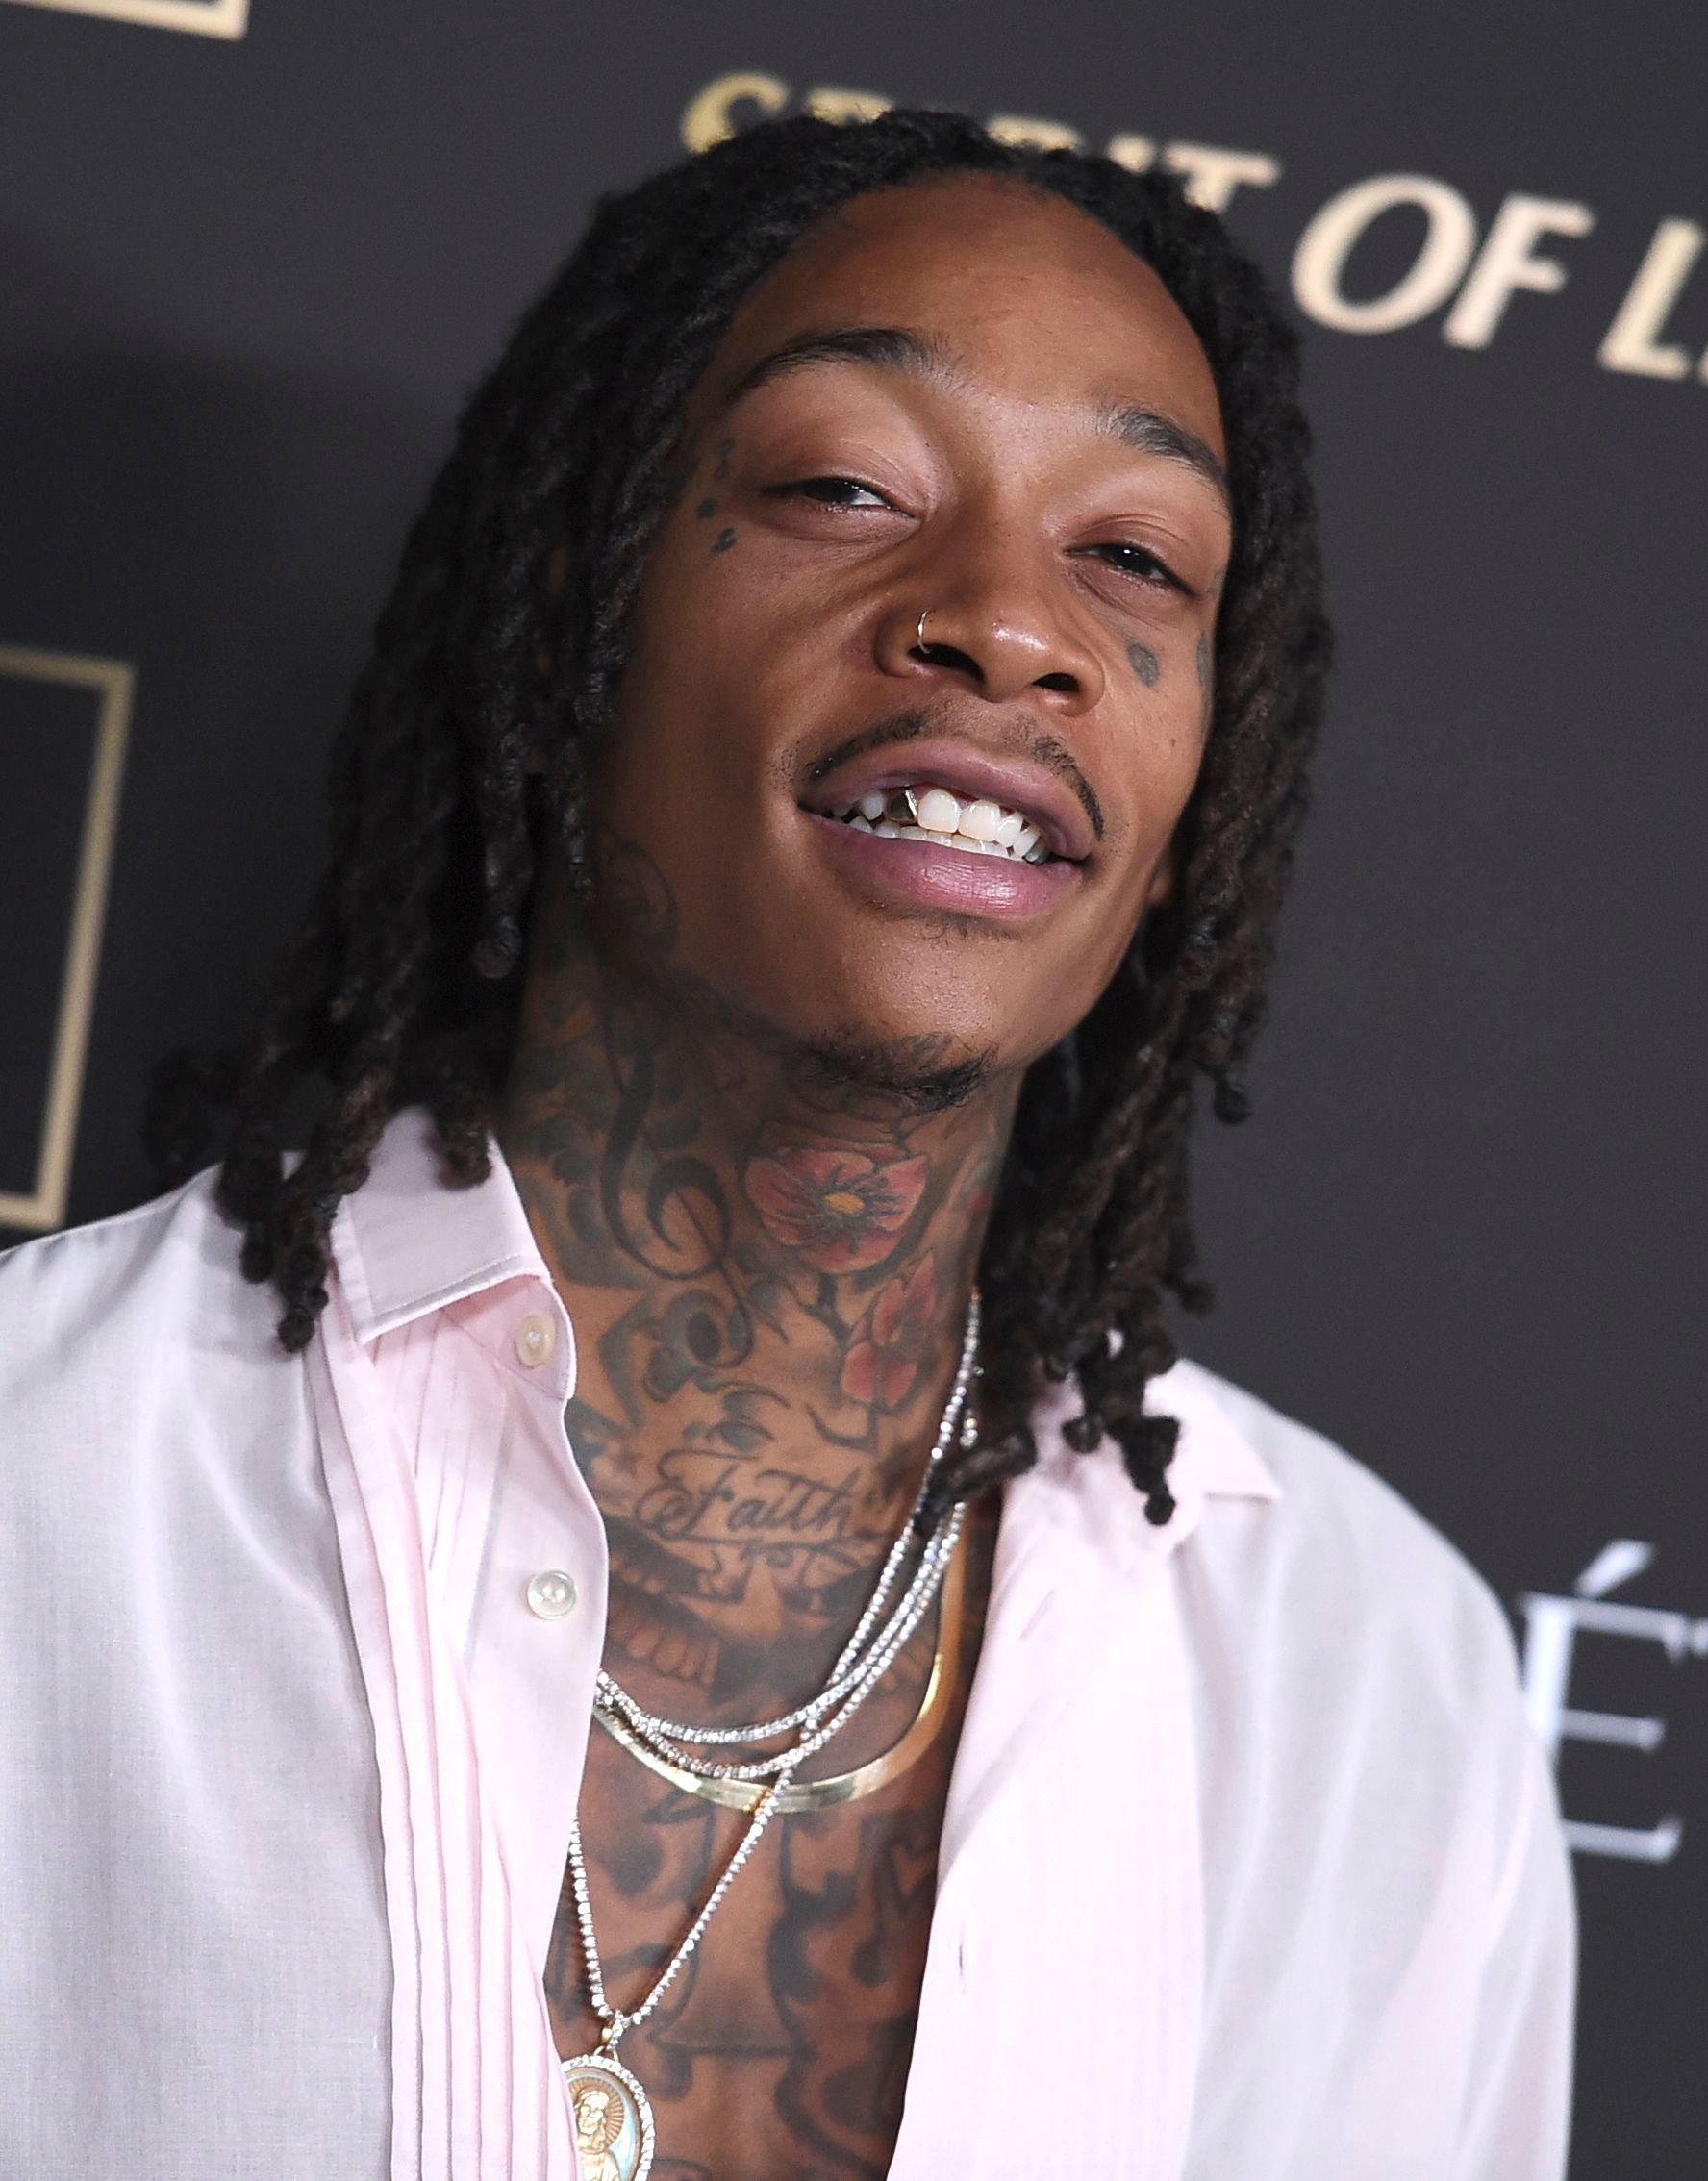 Wiz Khalifa Has a 'Reefer Party' in New Video